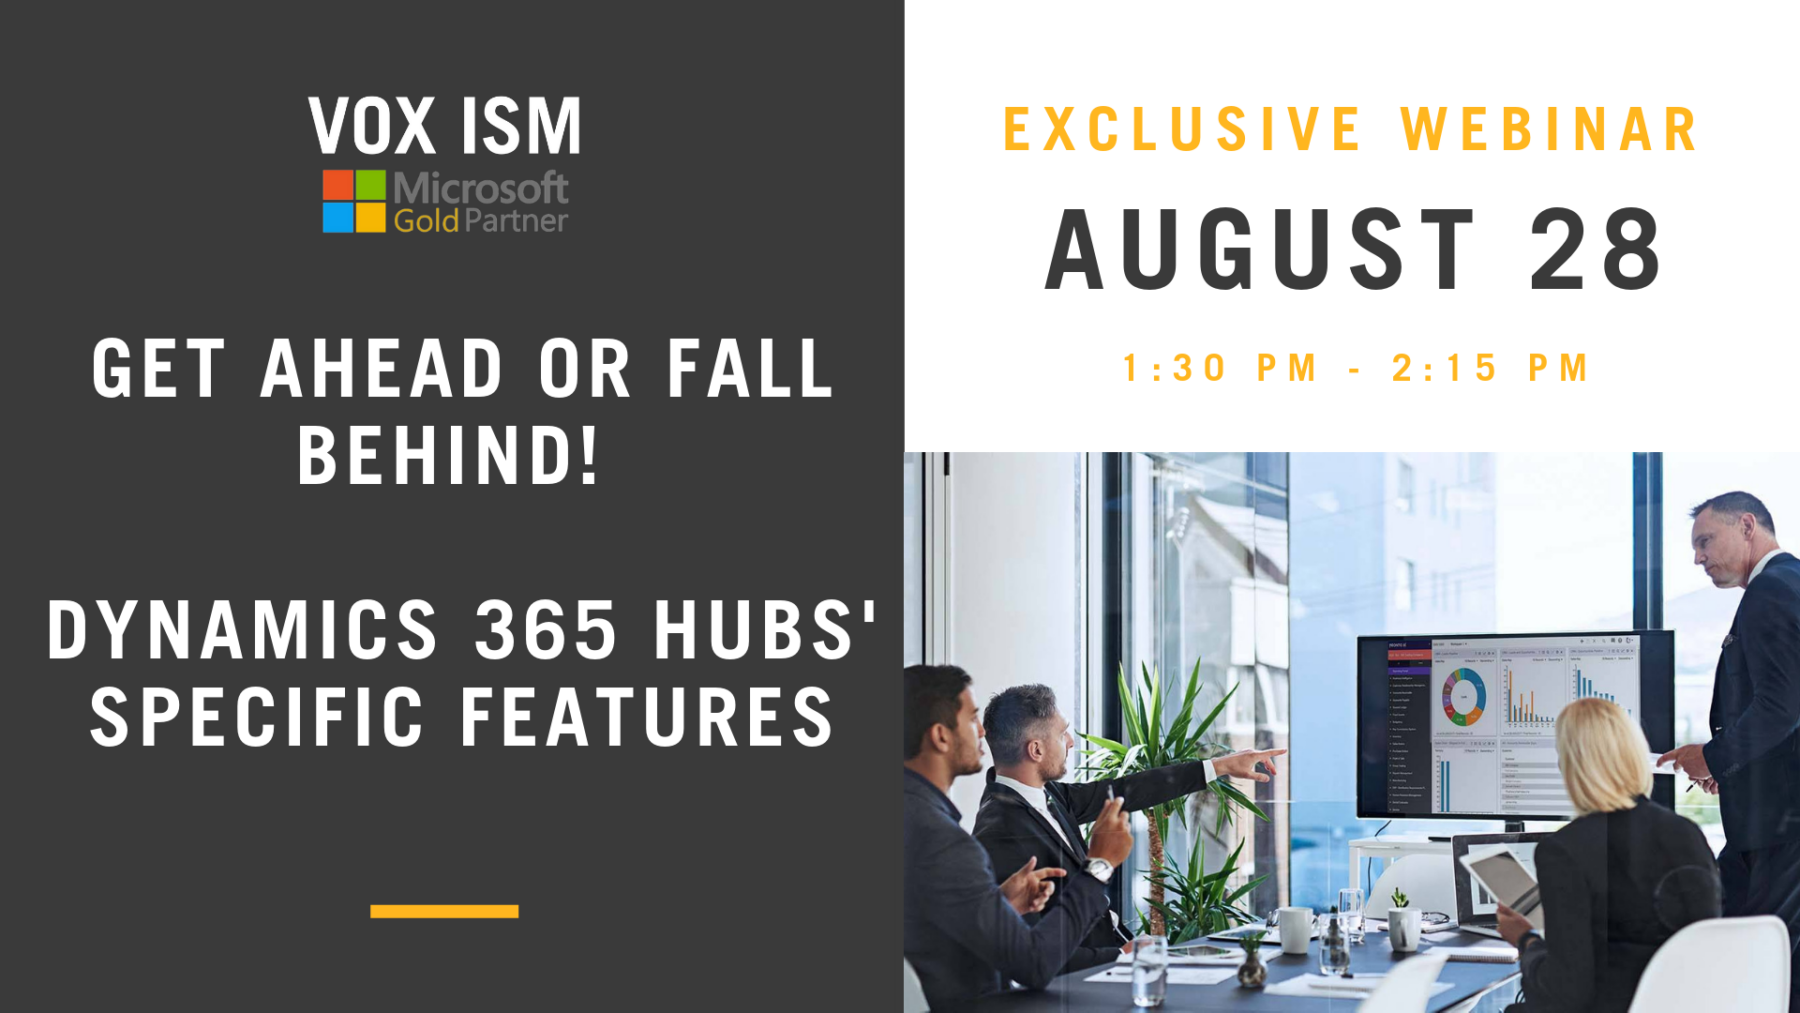 Get Ahead or Fall Behind. Dynamics 365 Hubs' Specific Features - August 28 - Webinar - VOX ISM